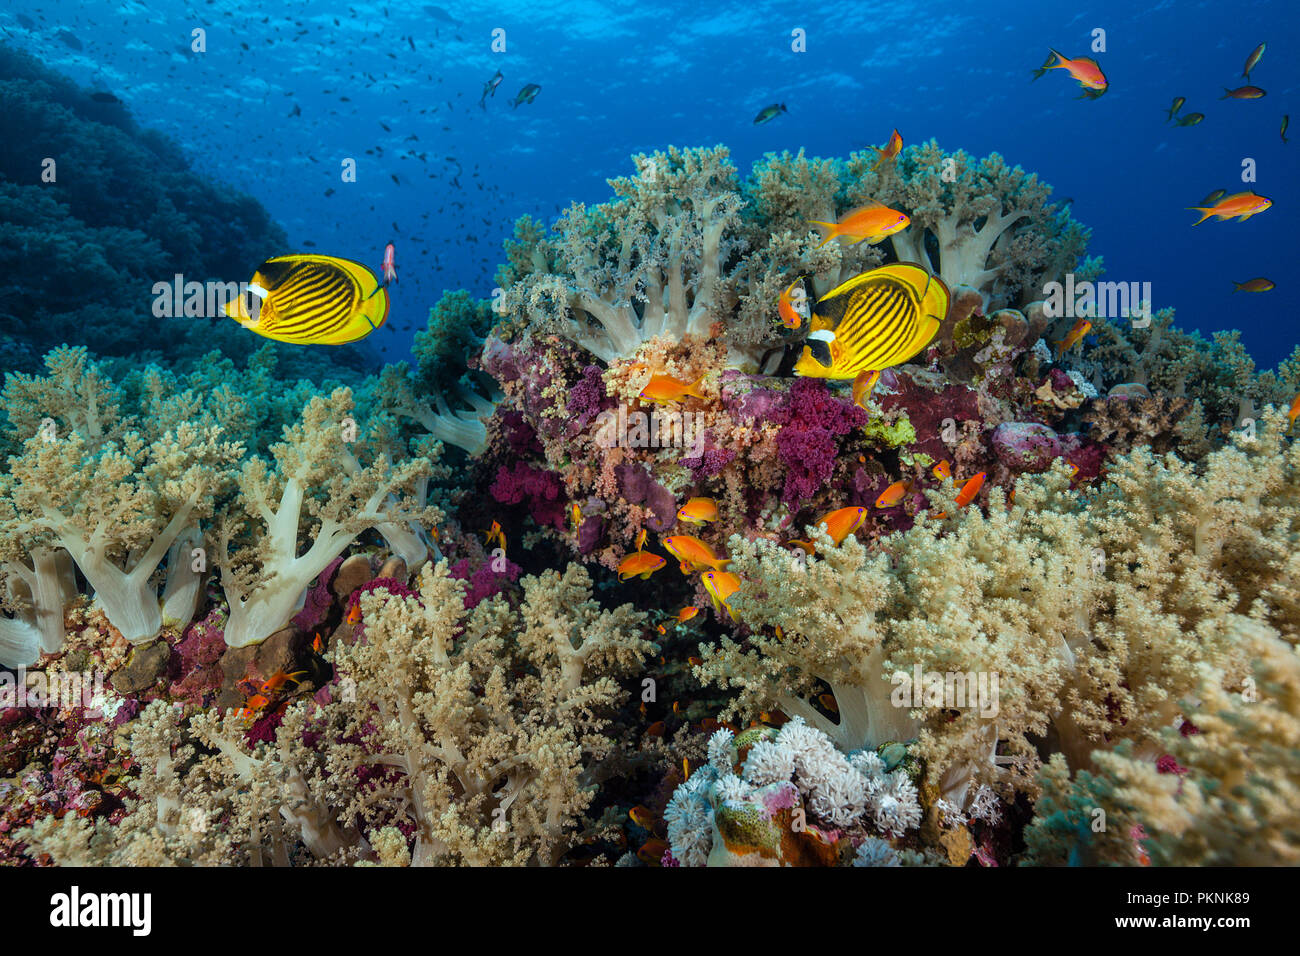 Red Sea Racoon Butterflyfish in Coral Reef, Chaetodon fasciatus, Brother Islands, Red Sea, Egypt Stock Photo